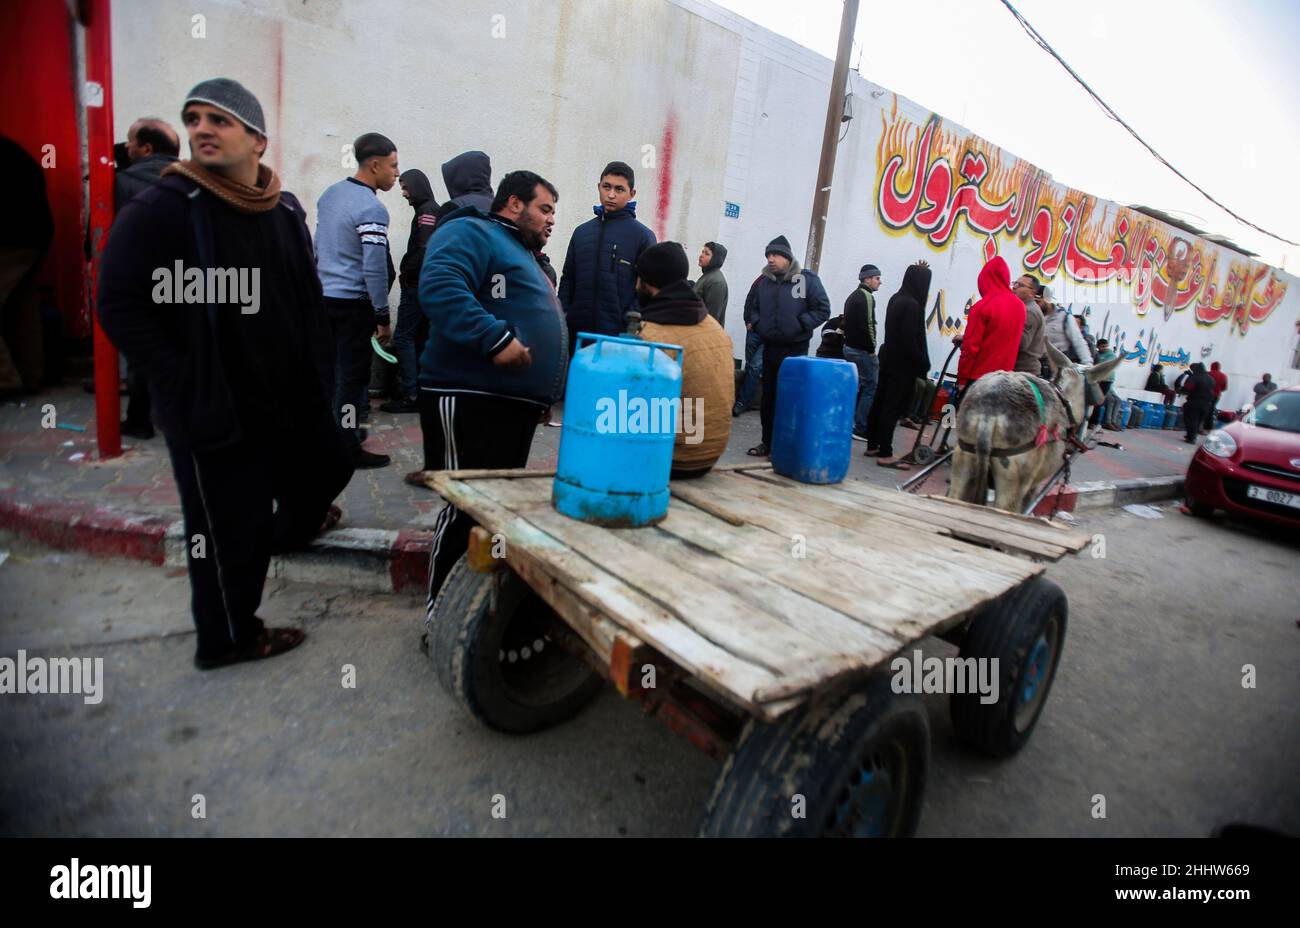 Gas cylinders are seen on top of a cart as Palestinians wait for their gas cylinders to be filled in front of big gas station. Shortage of gas and inability to fill the gas cylinders in their homes, which makes the winter difficult, as gas is one of the sources of heating. The crisis is repeated almost every year at this time as a result of the increasing need for gas, in addition to the lack of a strategic reserve of gas for the owners of the stations, the Gaza strip obtains gas either through the Rafah crossing from Egypt or from the Israeli side. Stock Photo